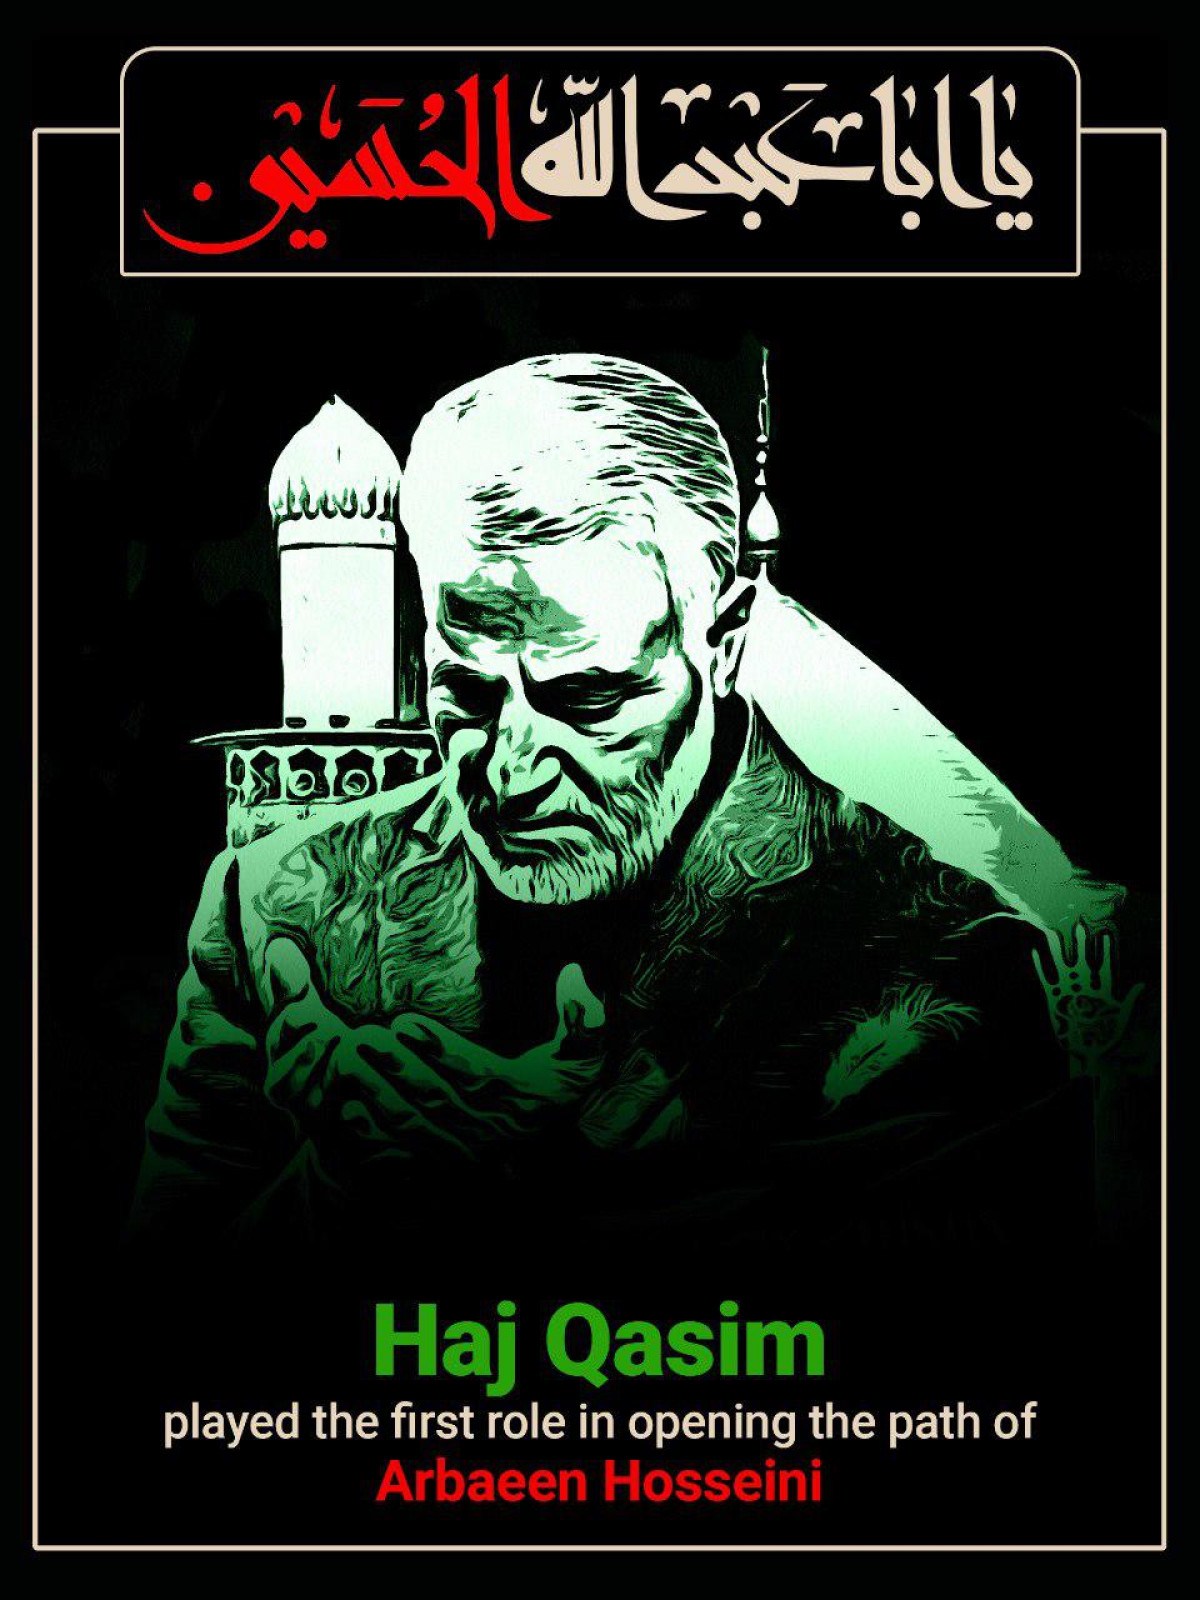 Haj Qasim played the first role in opening the path of Arbaeen Hosseini